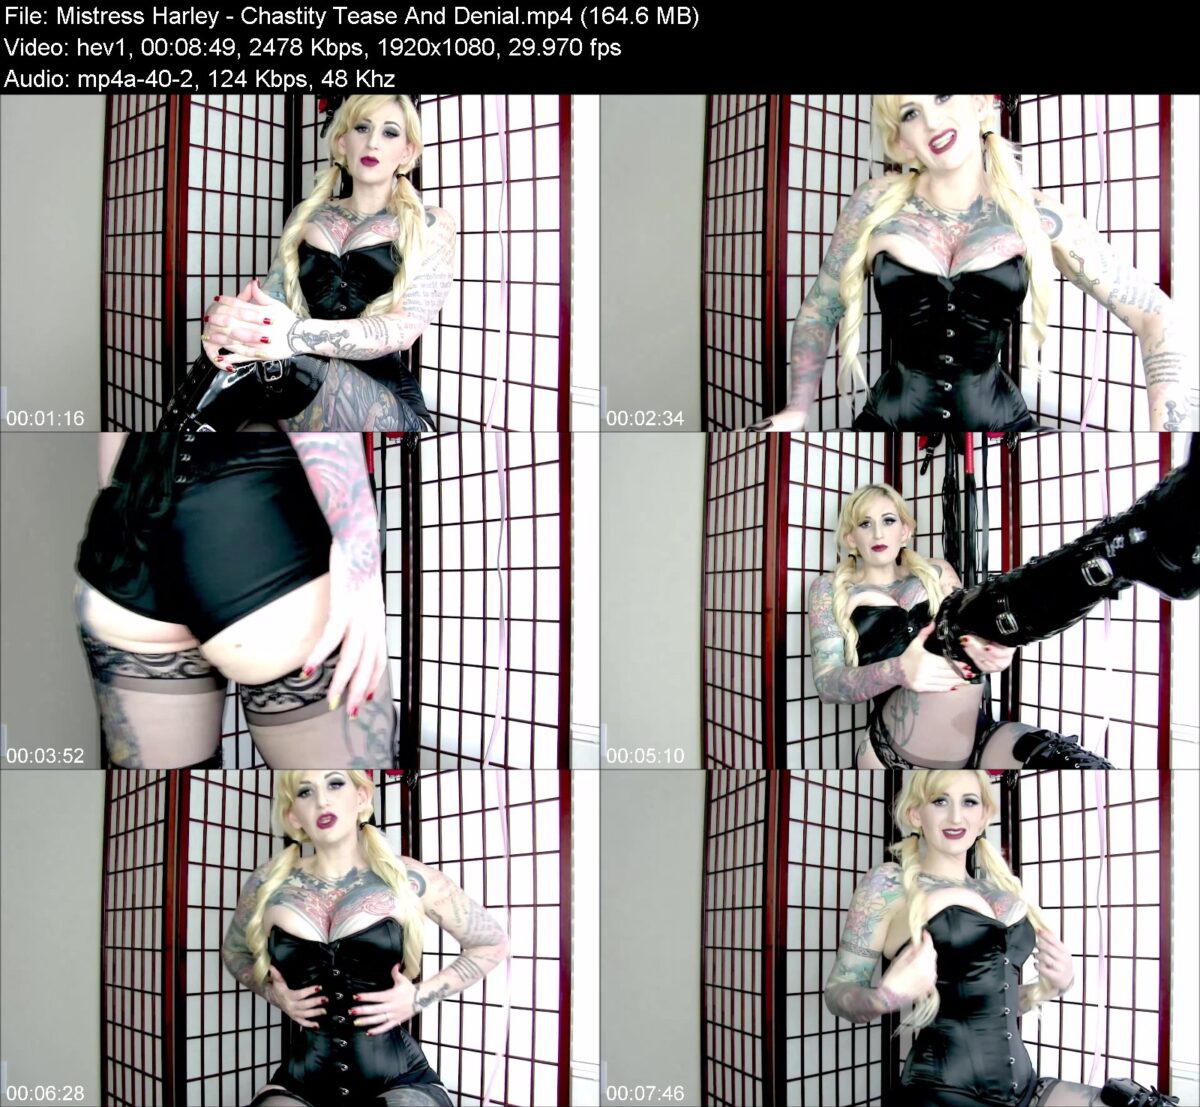 Actress: Mistress Harley. Title and Studio: Chastity Tease And Denial